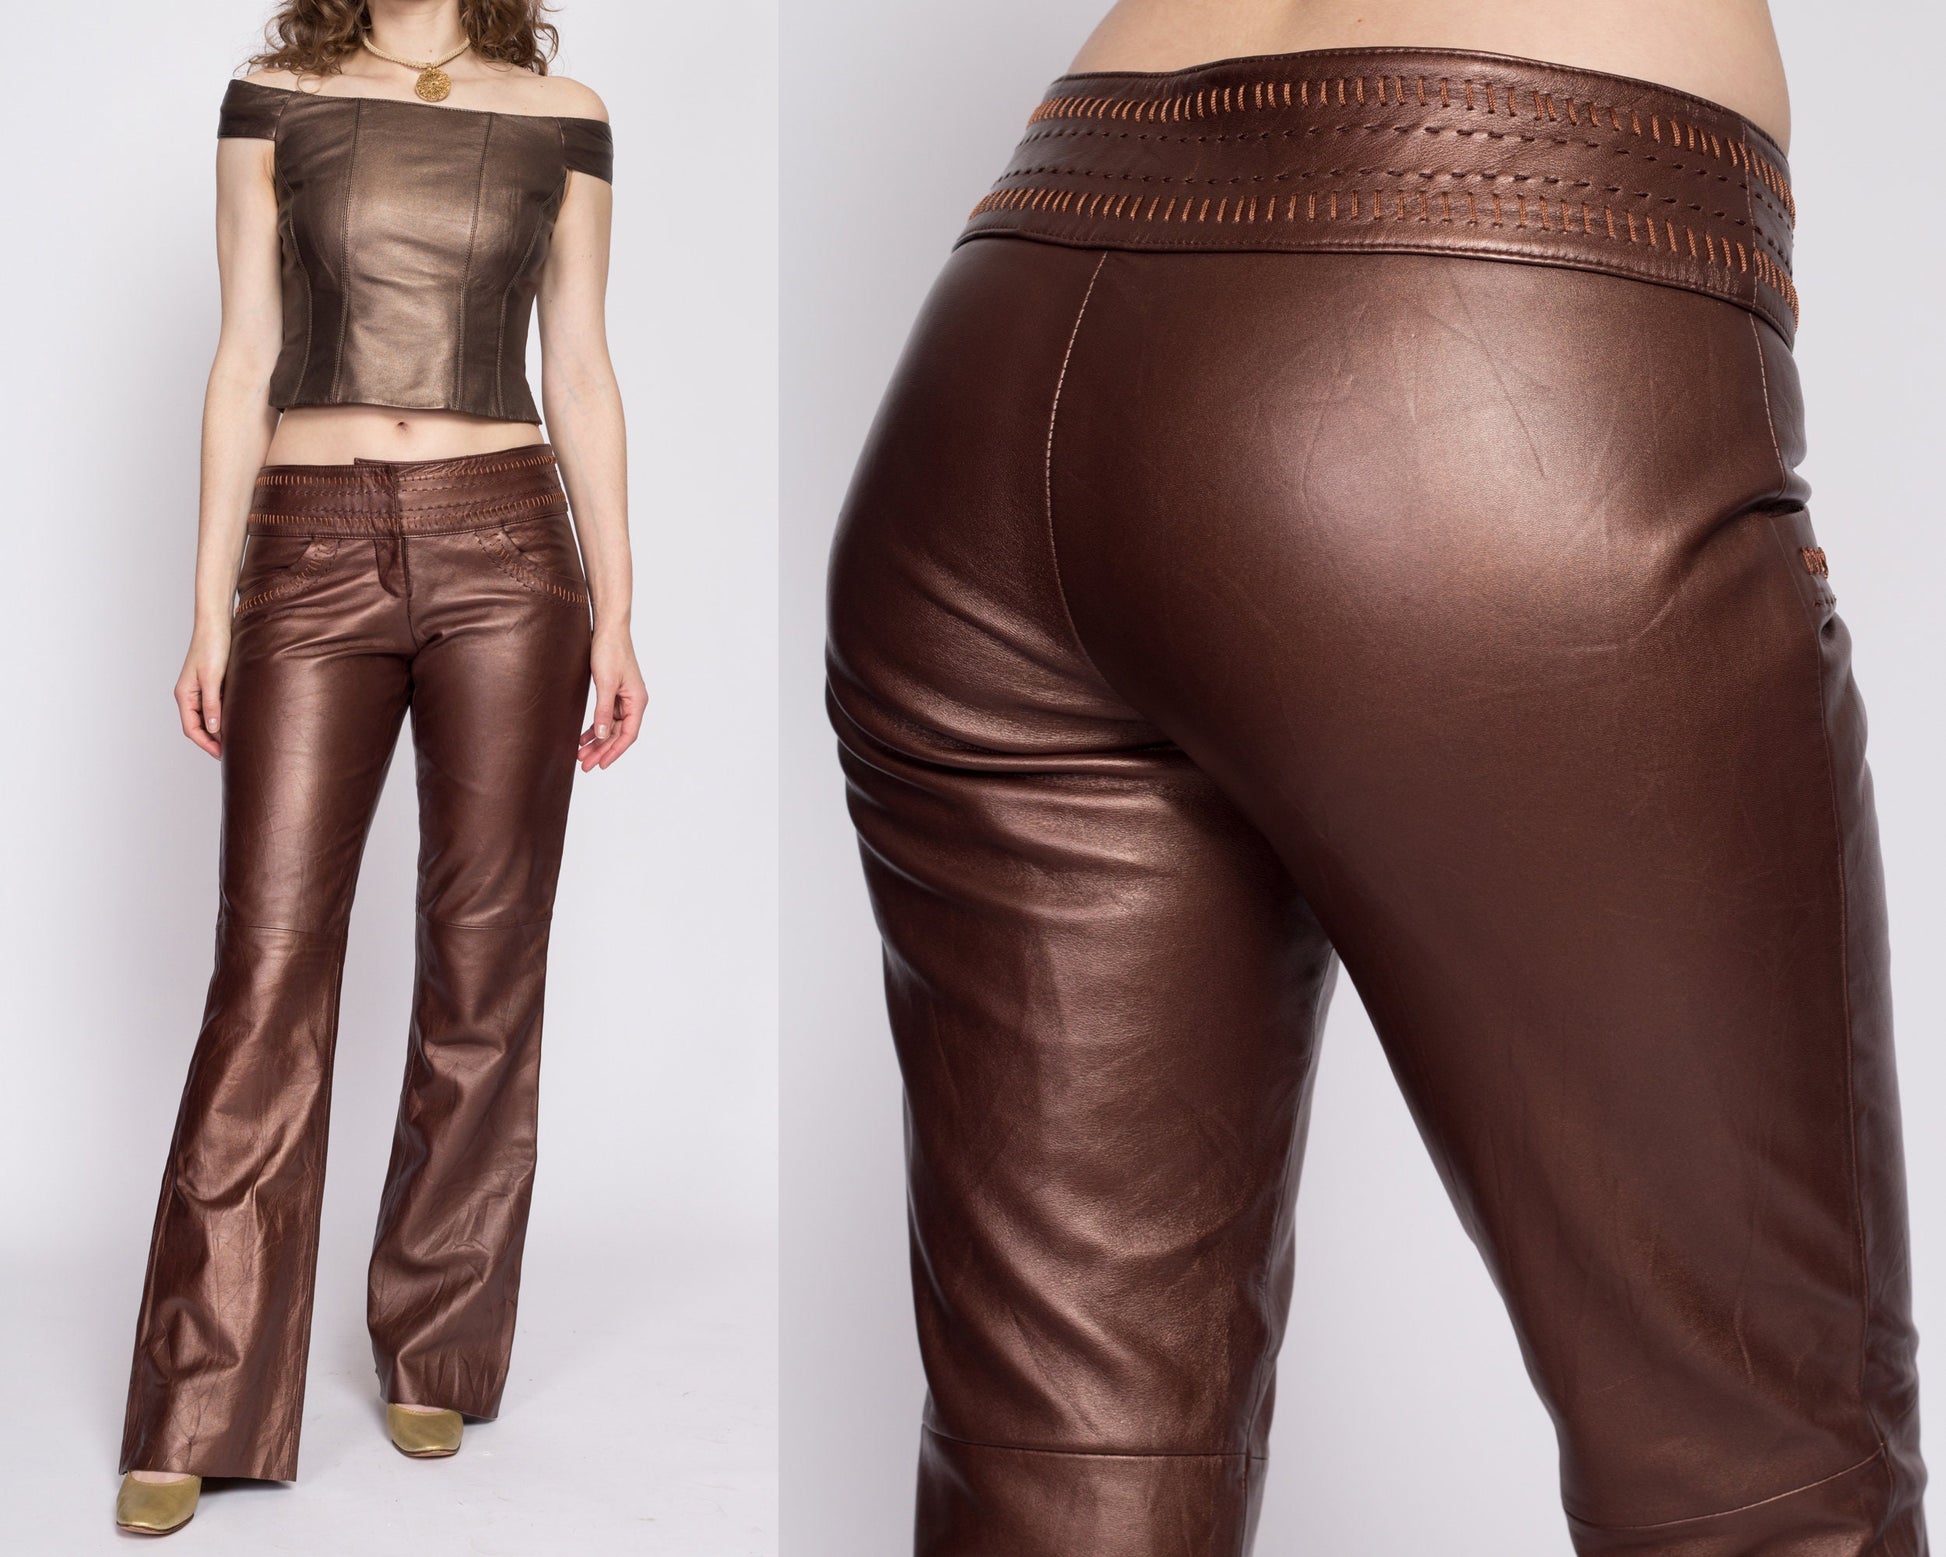 CU COPPER SLIM Copper Slim High Waisted Activewear Pants - Womens India